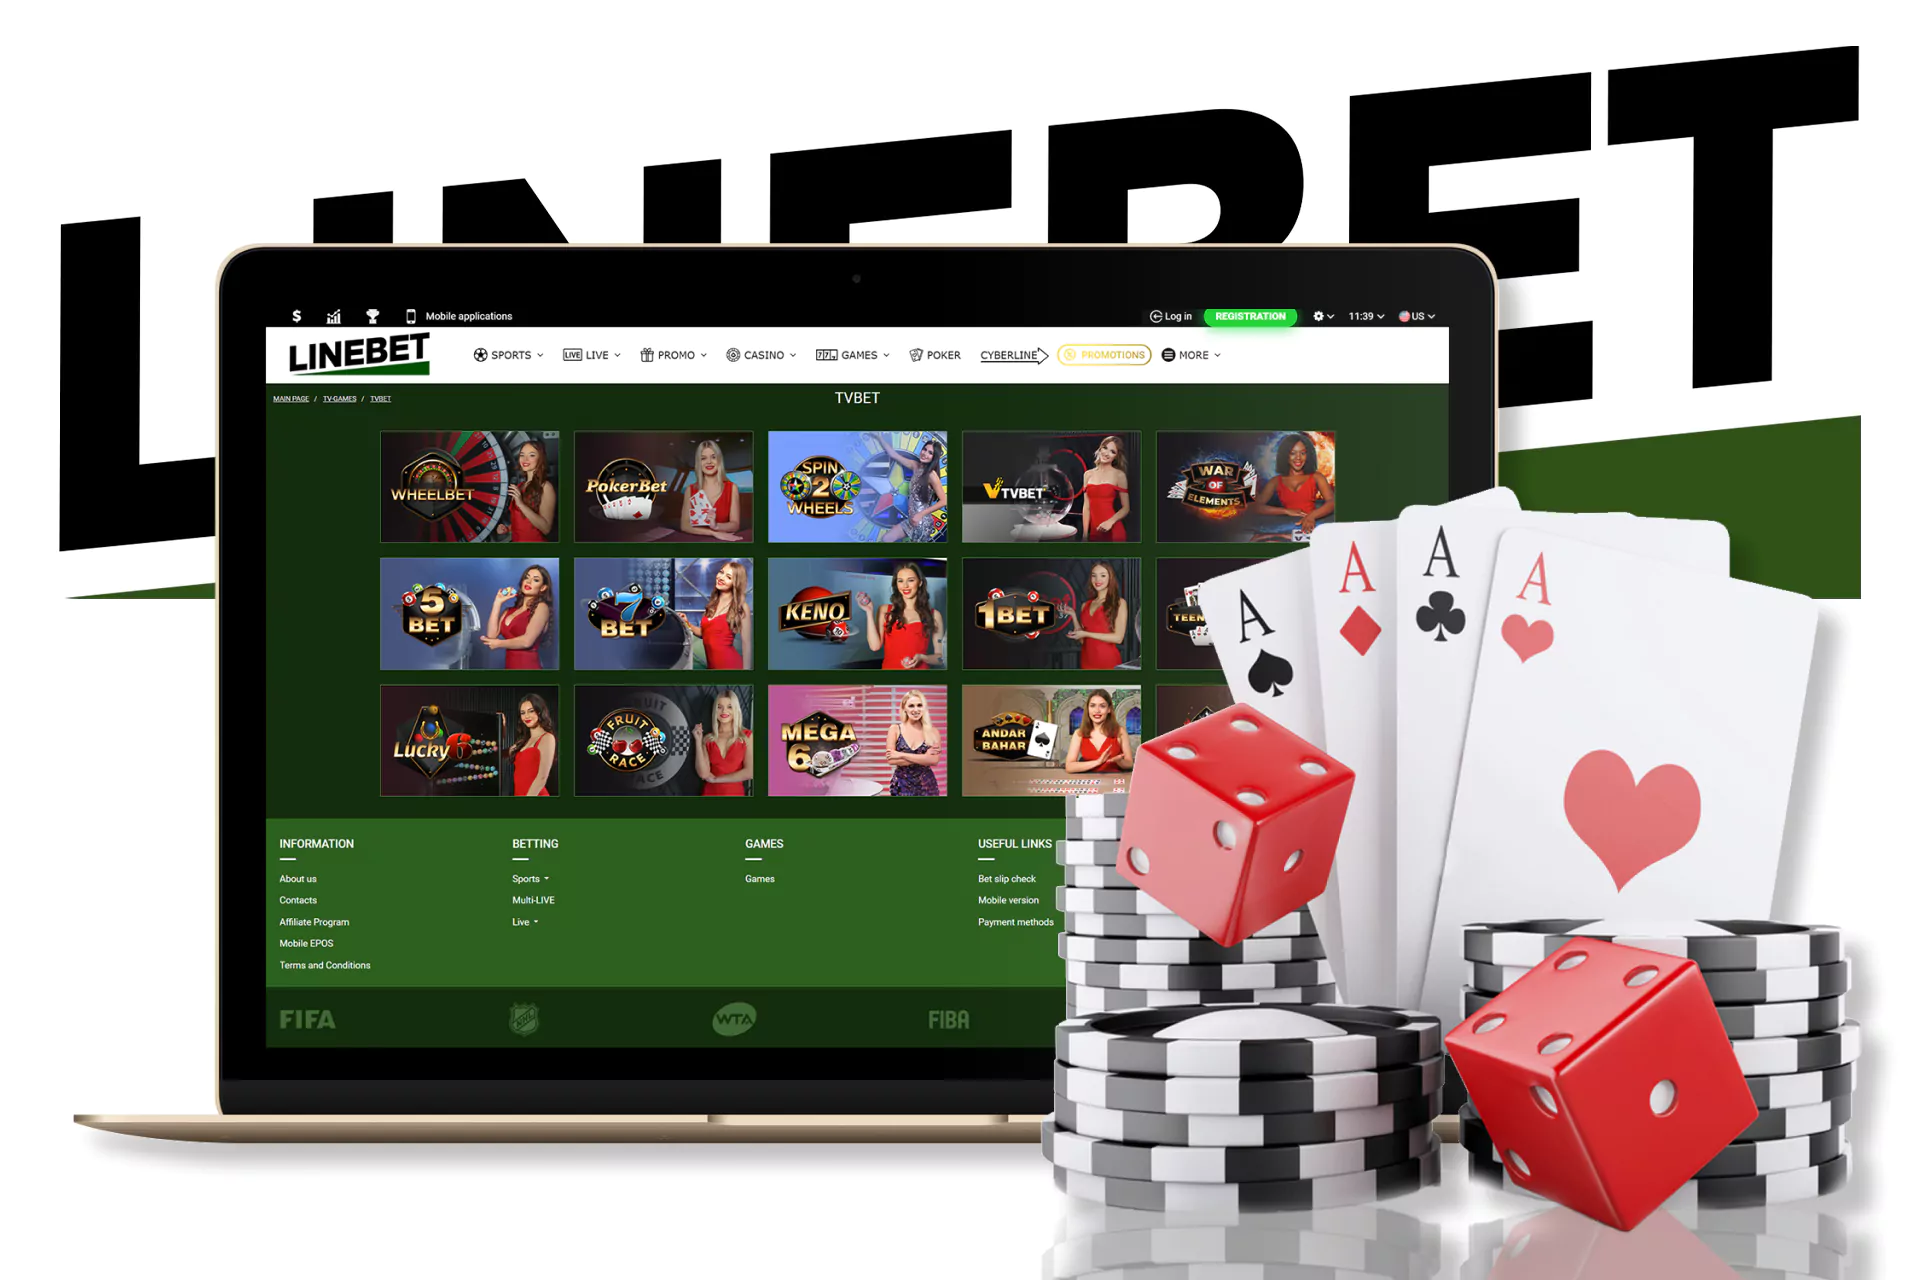 In TV Games from Linebet, you can play exciting games and use a simple interface.